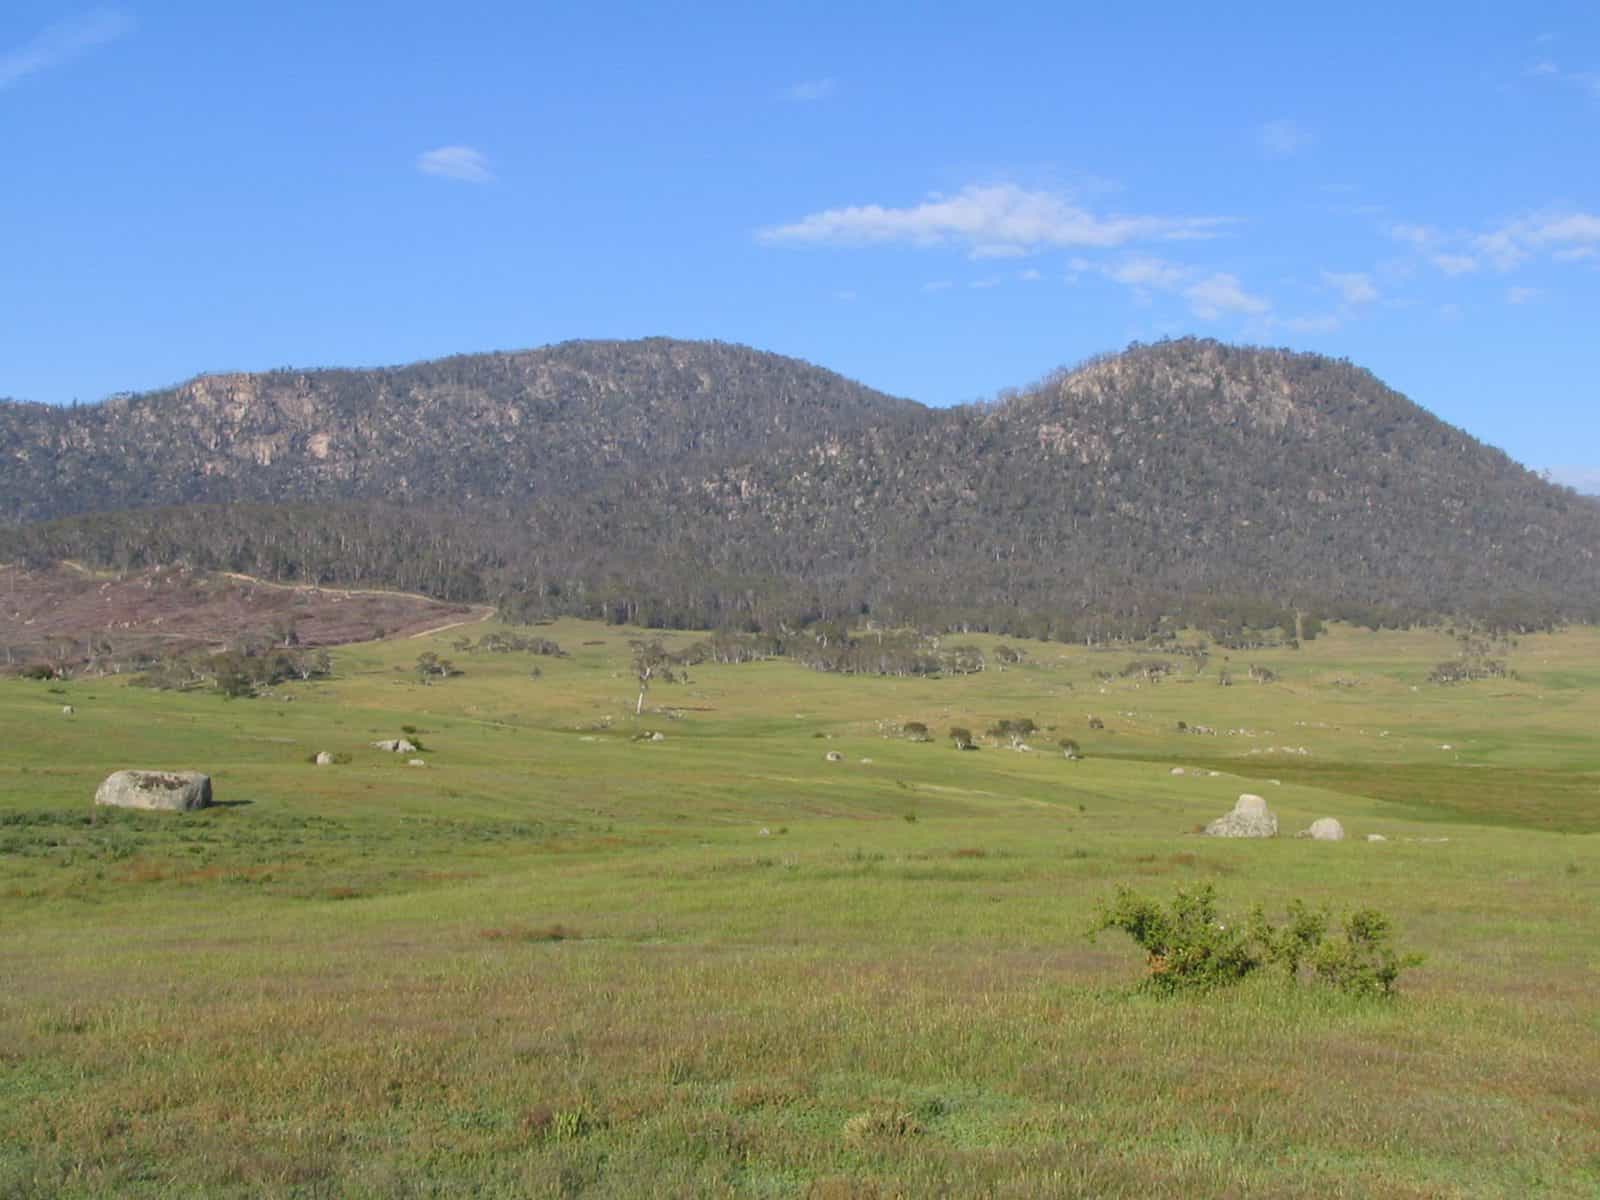 View of ranges with expansive grasslands in the foreground